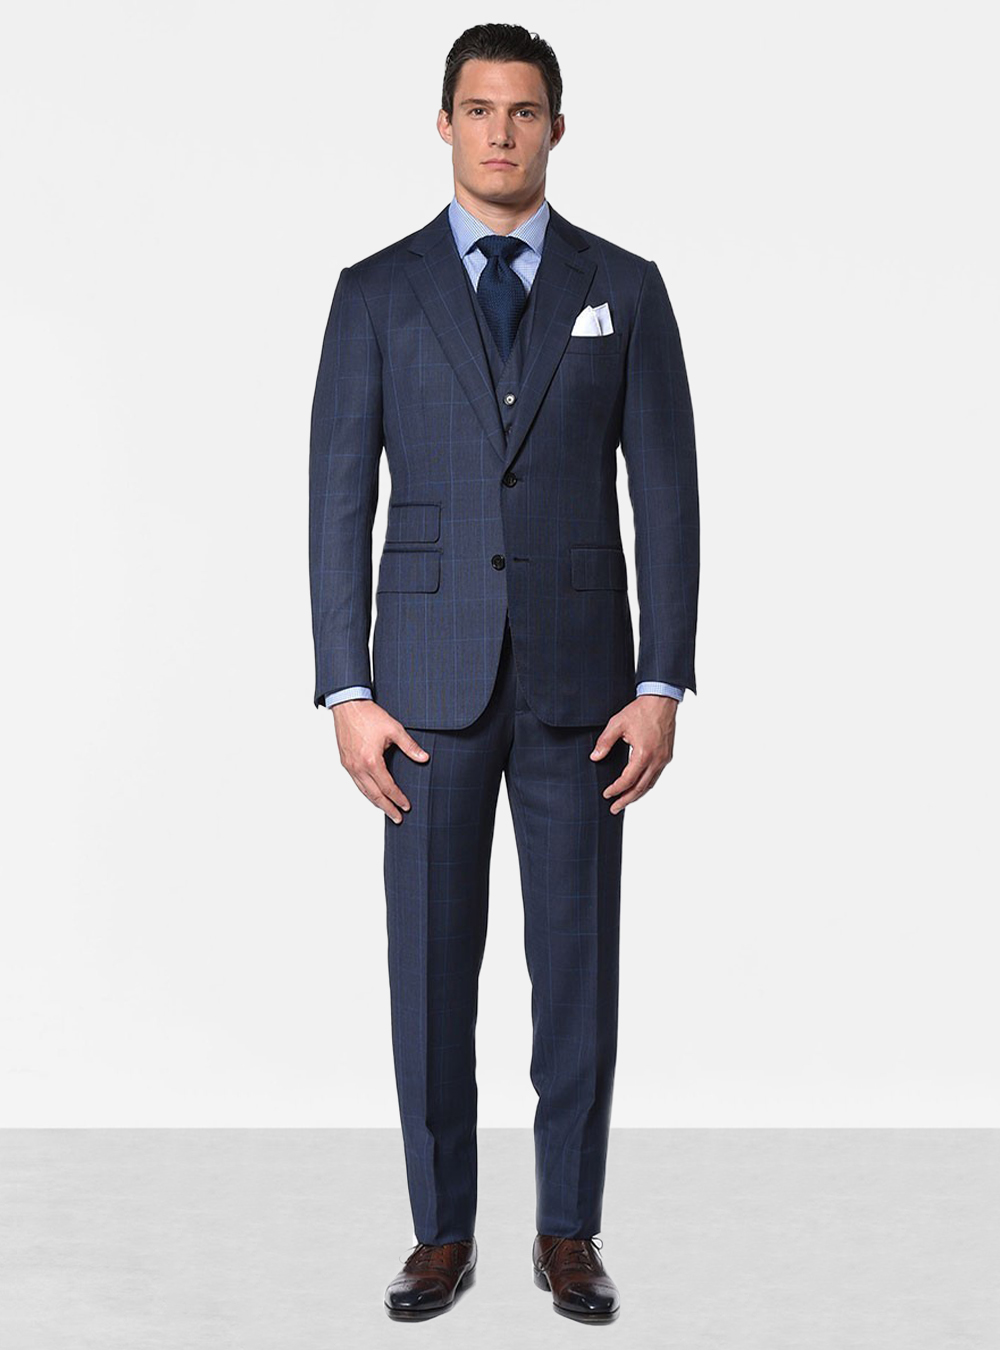 Navy windowpane three-piece suit, light blue dress shirt, navy tie and brown oxford shoes